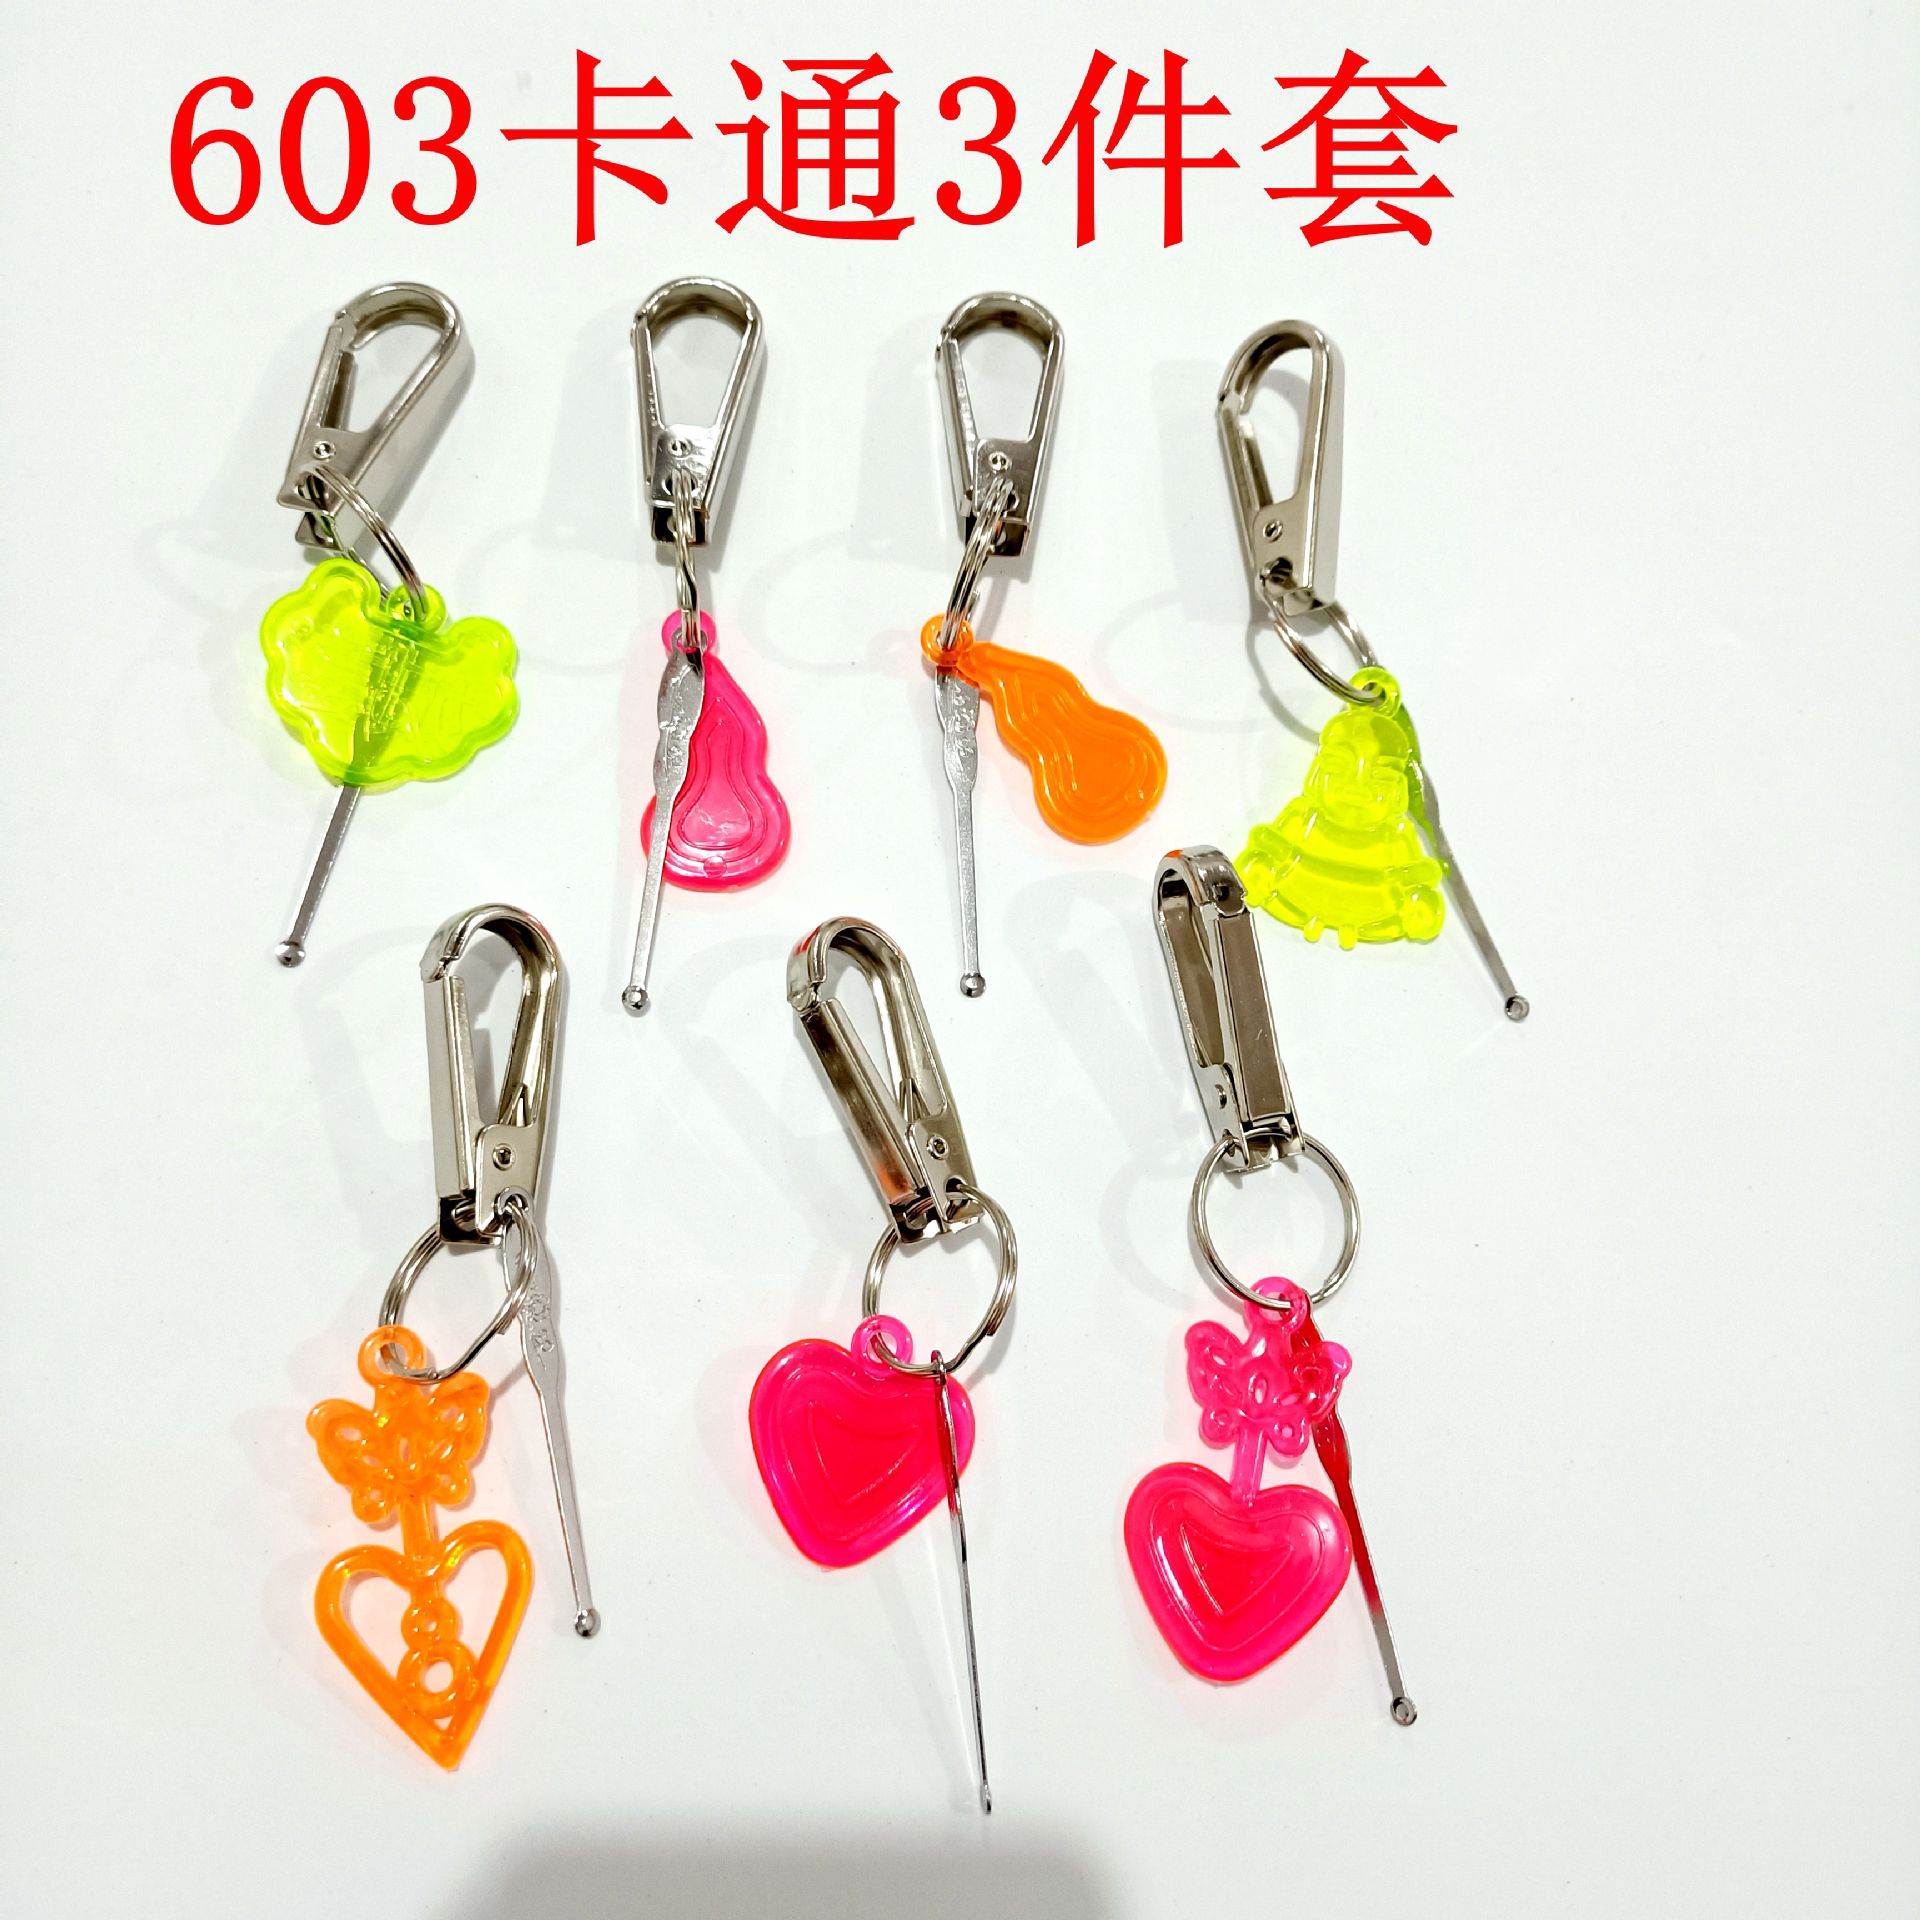 603 Cartoon Key Button Metal Keychain with Pendant Key Iron Button 1 Yuan Supply Gift Supply Department Store